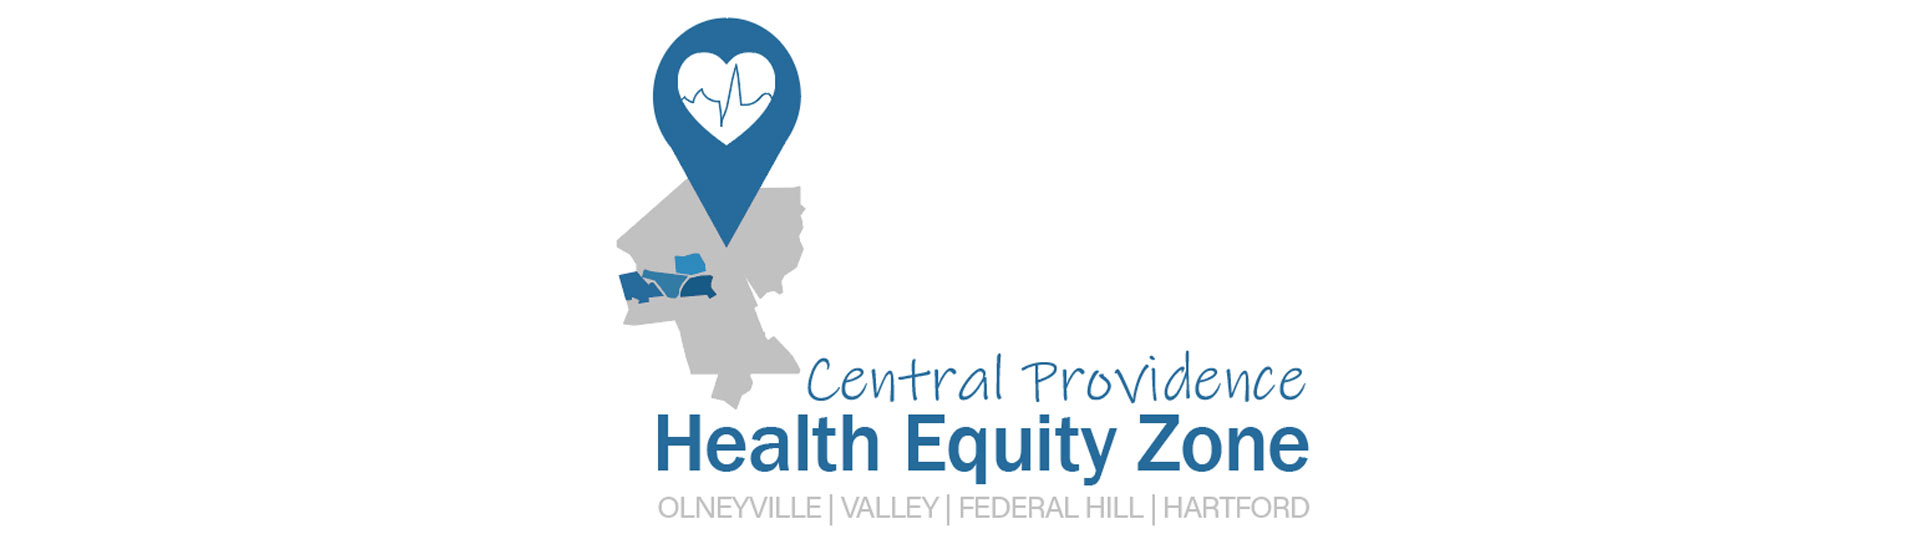 Central Providence Health Equity Zone announces nearly $400,000 in community-based grants